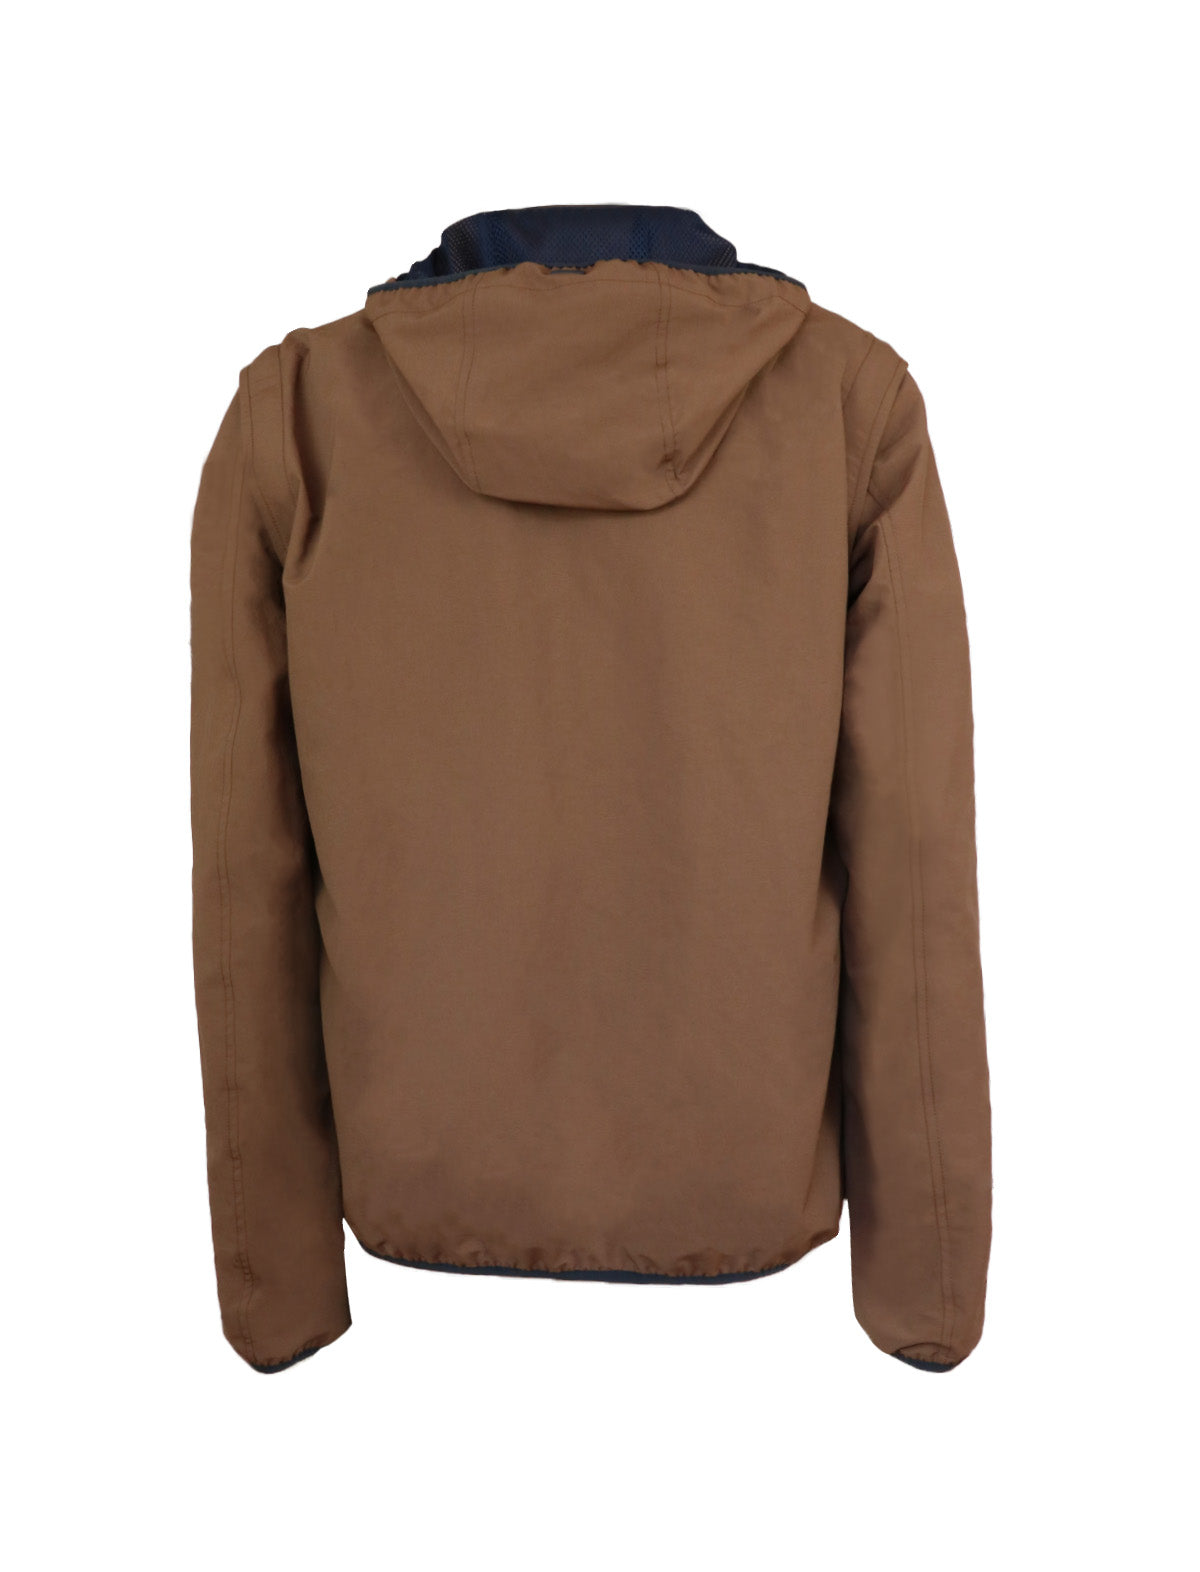 HERNO Zip-Out Plaster Bomber Jacket in Copper Brown